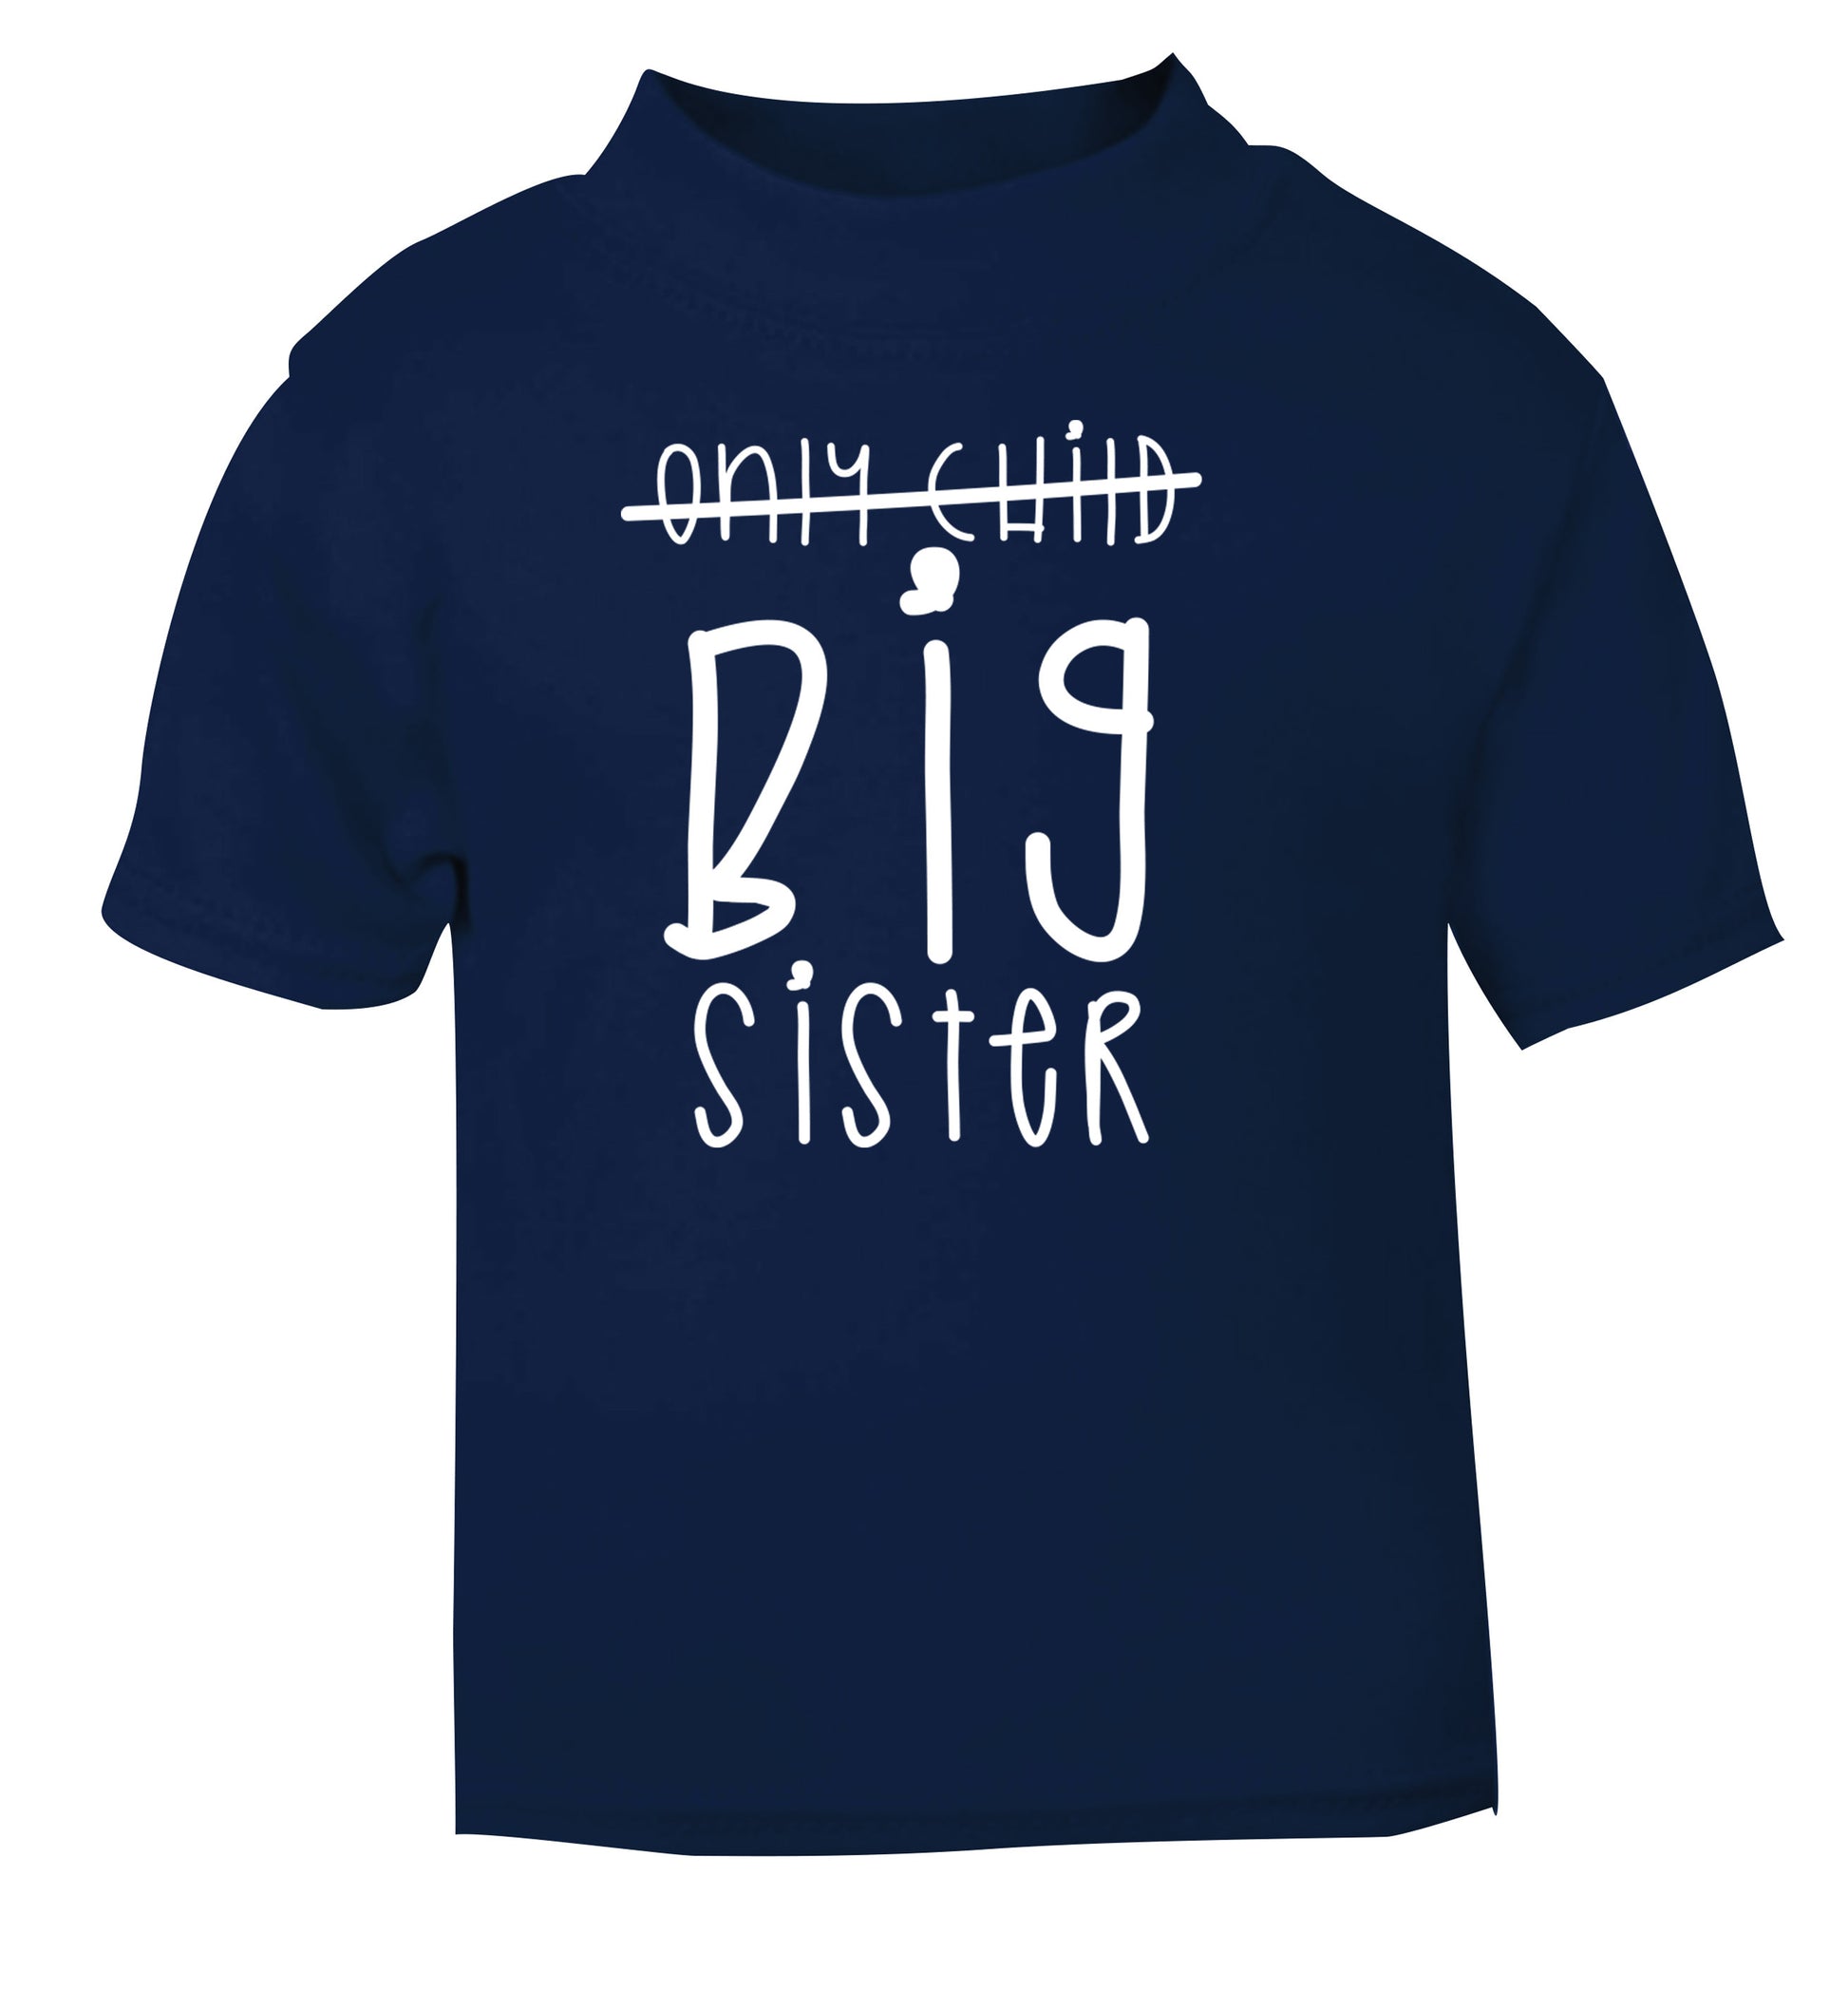 Only child big sister navy Baby Toddler Tshirt 2 Years